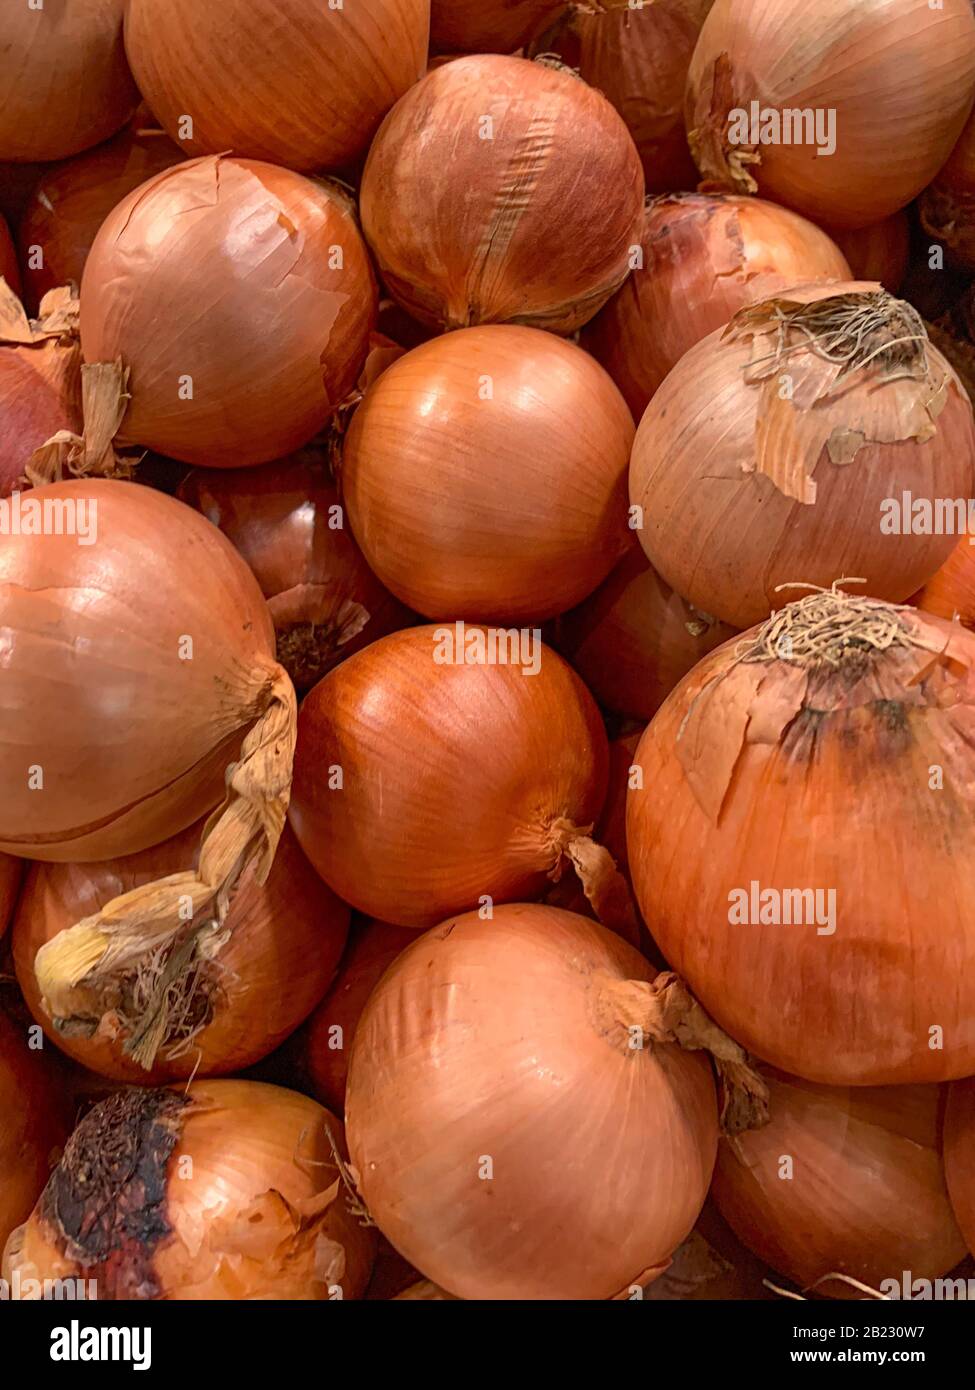 Full frame shot of onions, Panama, Central America Stock Photo